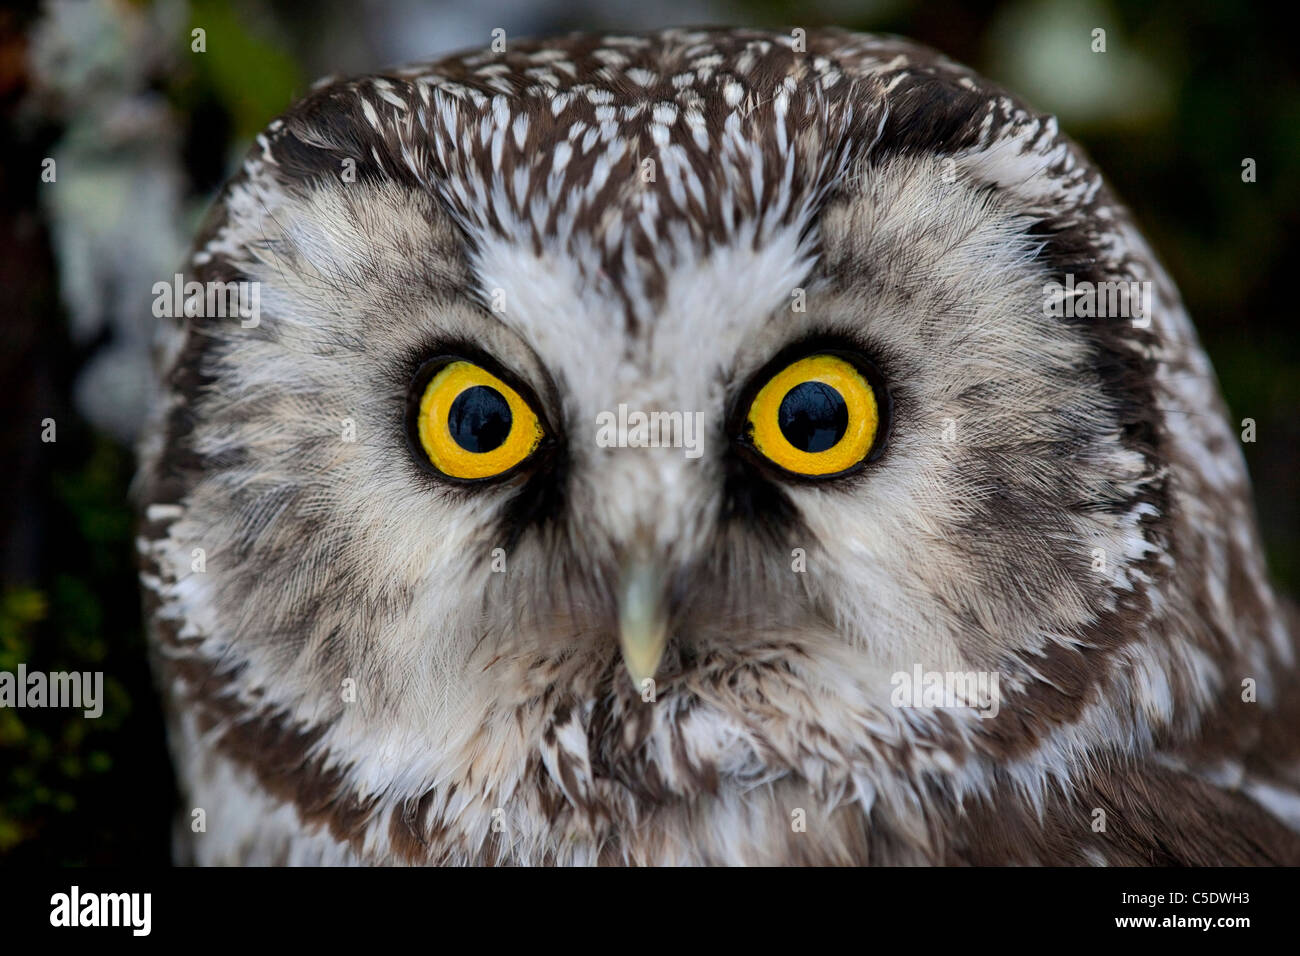 Extreme close-up portrait of an alert Boreal Owl Stock Photo